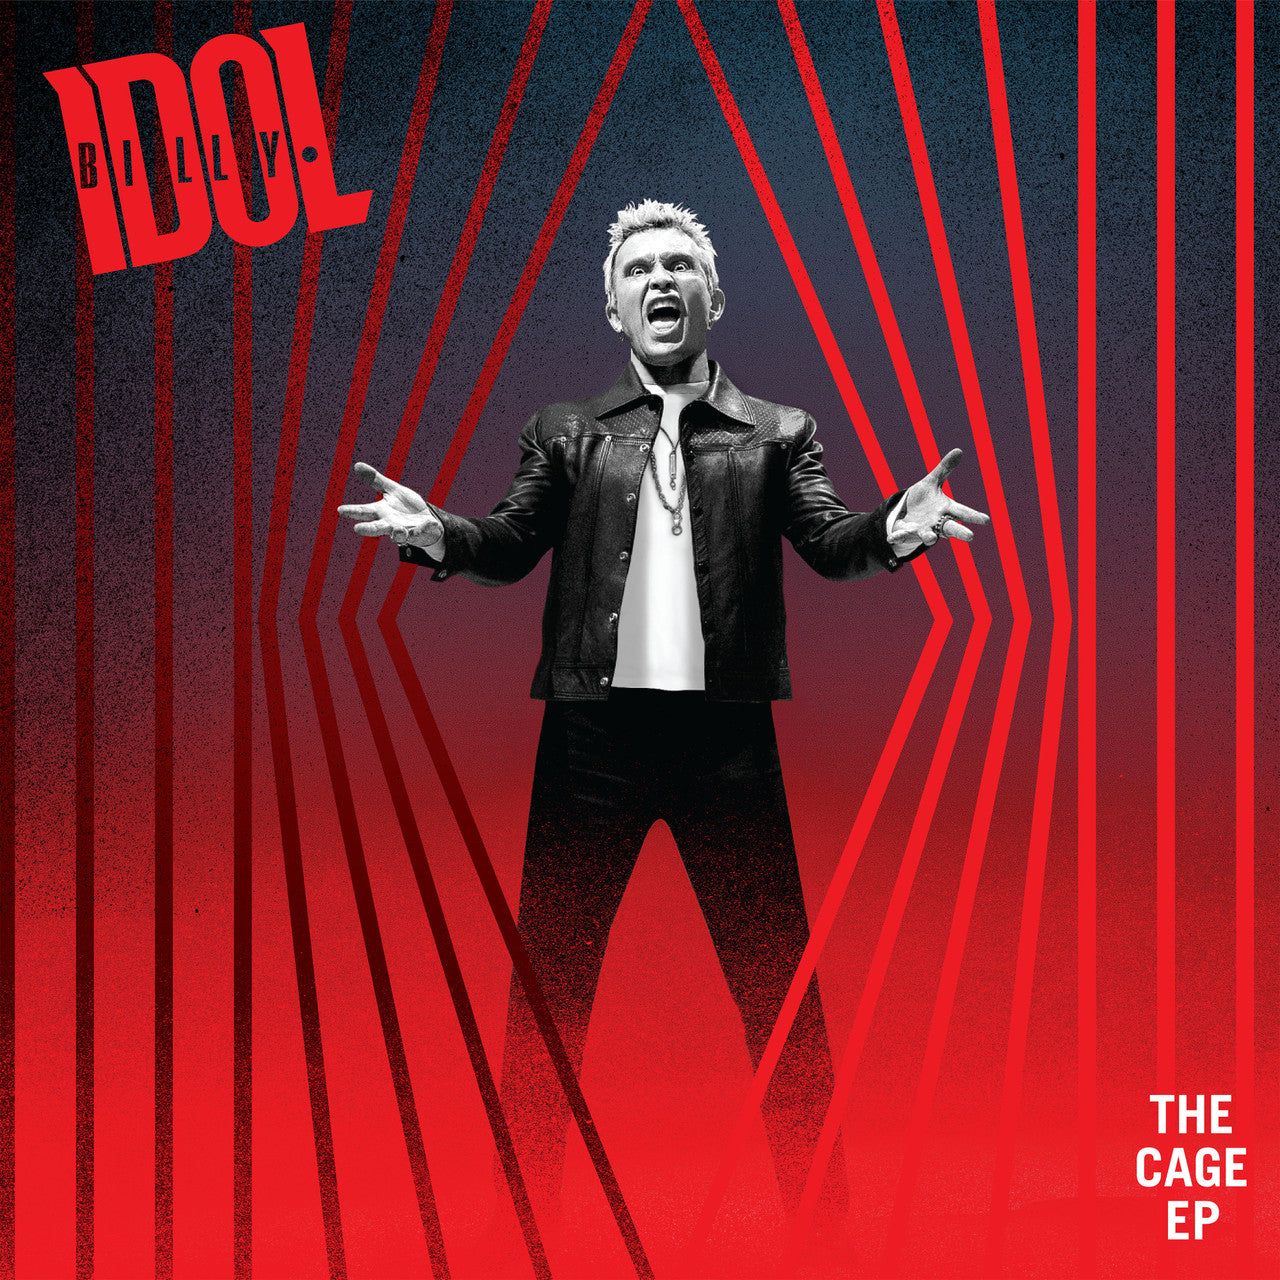 BILLY IDOL 'THE CAGE' 12" EP